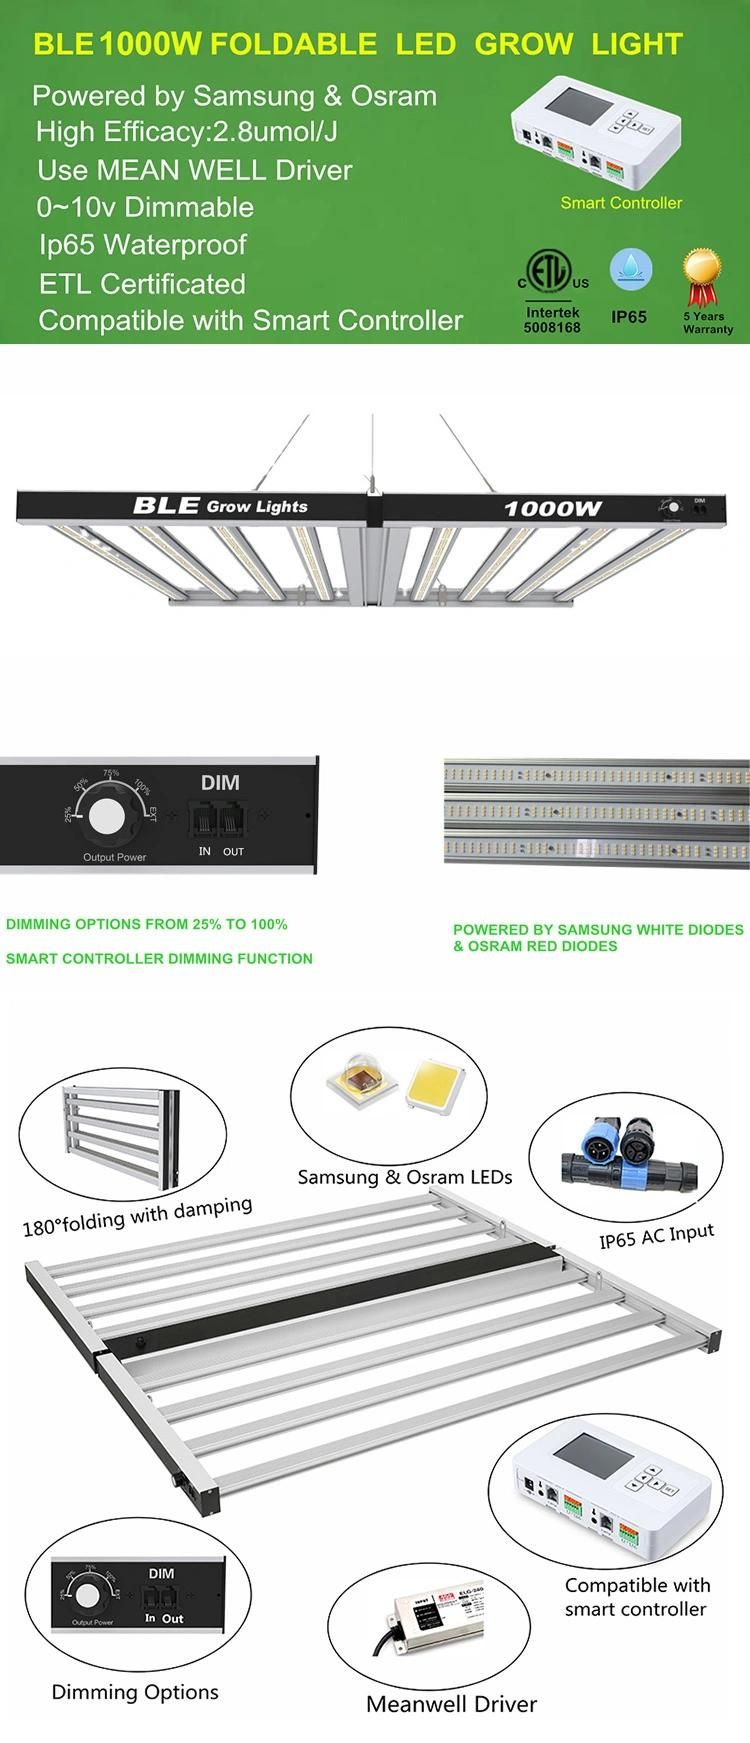 BLE Newest Greenhouse LED Grow Light Design Samsung Lm301b High Ppfd 1000W HPS Waterproof IP65 for Medical Plant